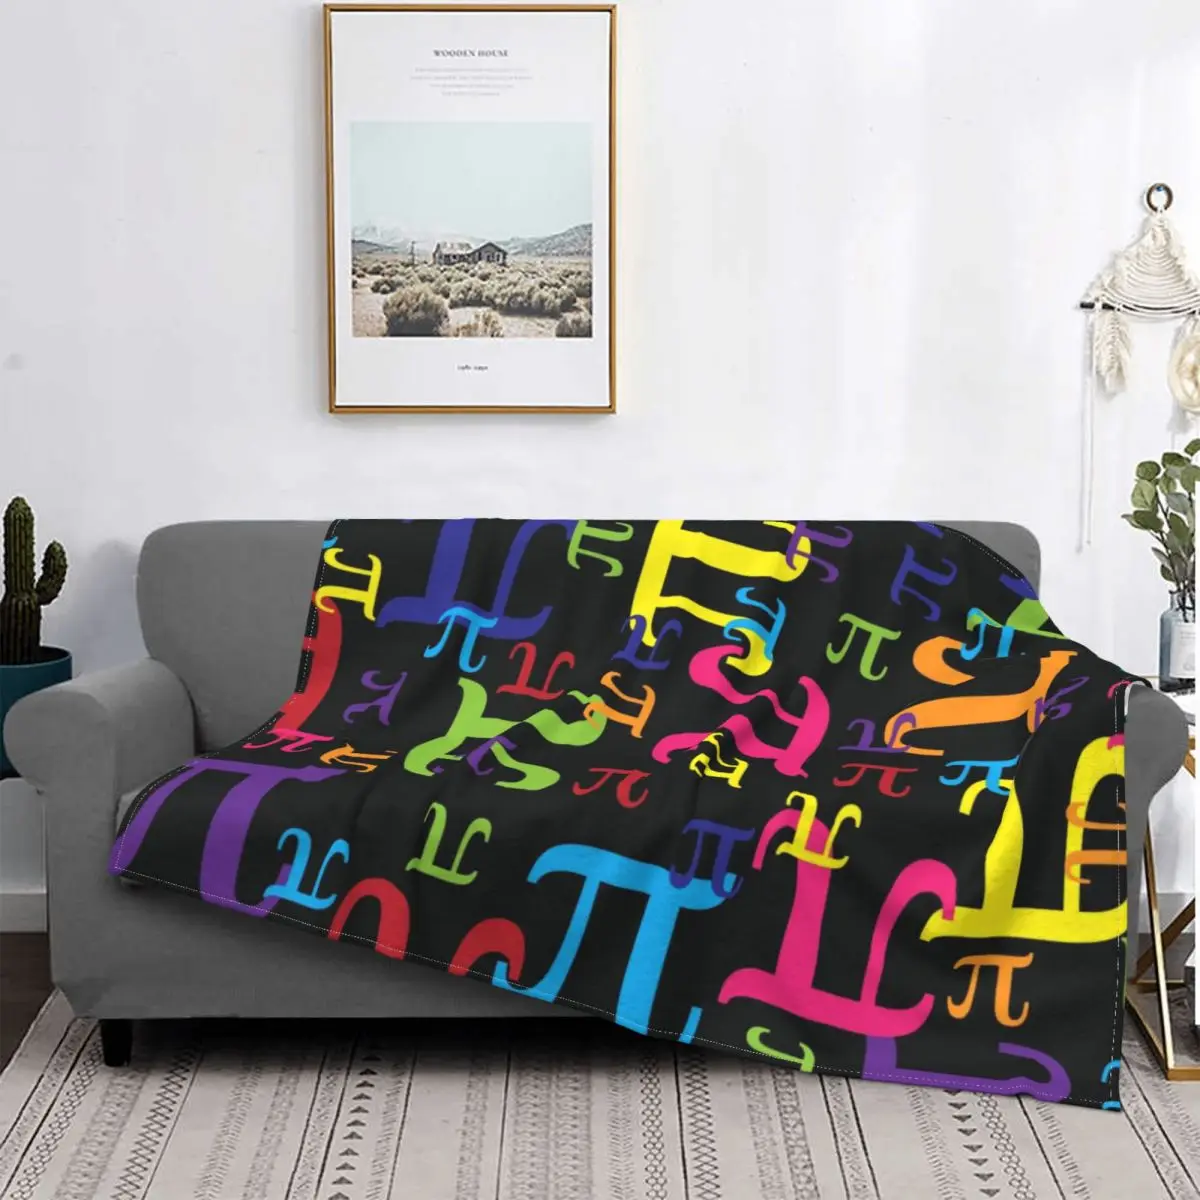 

Pieces Of Pi Blanket Soft Flannel Fleece Warm Math Science Nerd Geek Throw Blankets for Travel Bedroom Couch Bedspreads